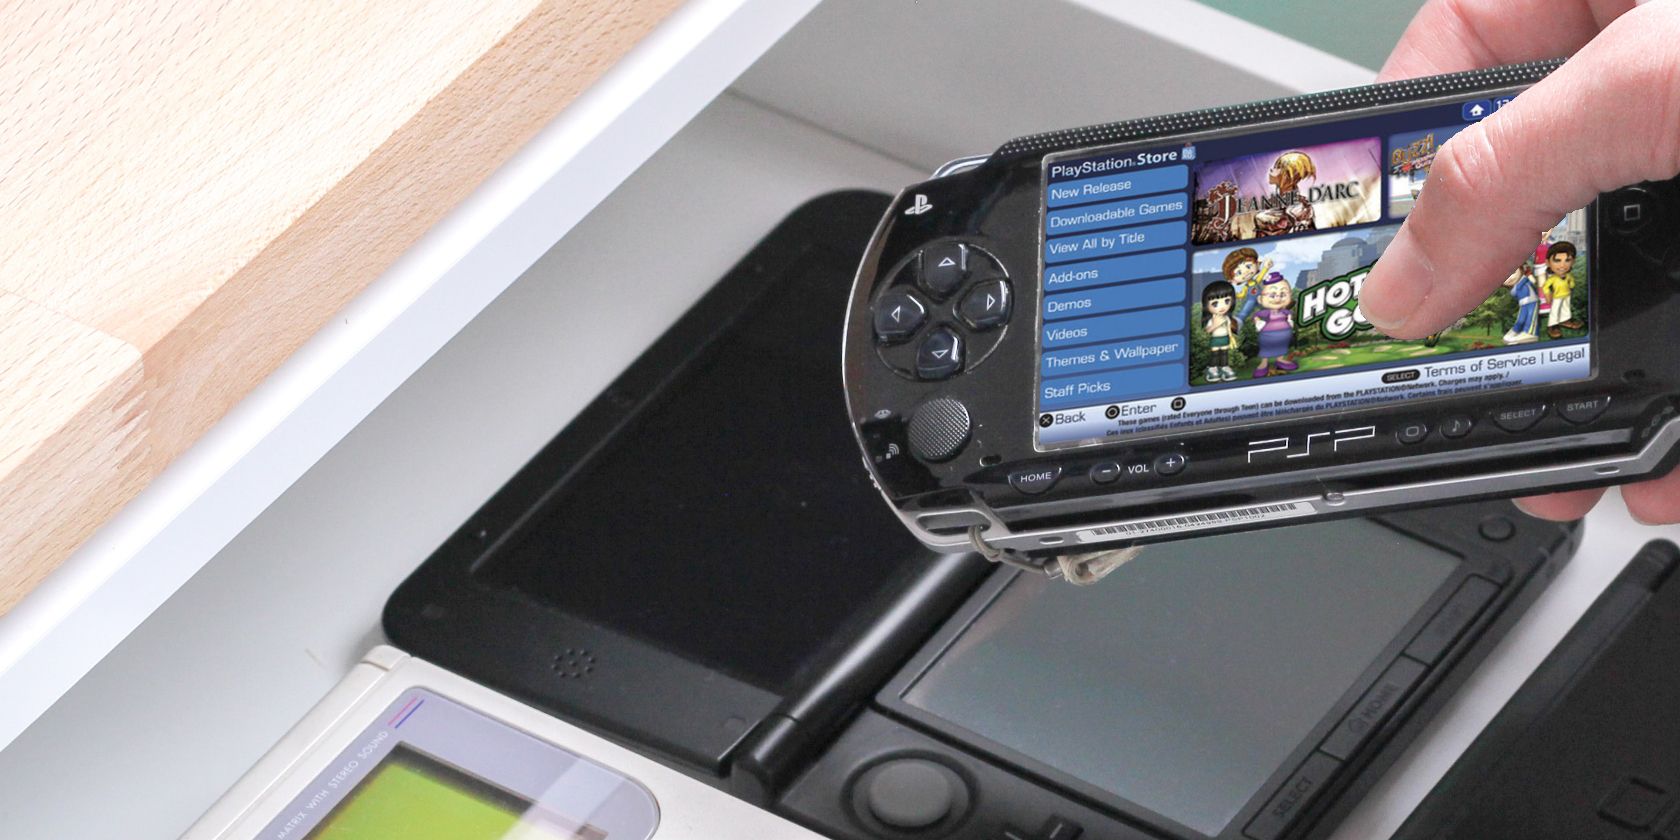 Can you still buy PSP?